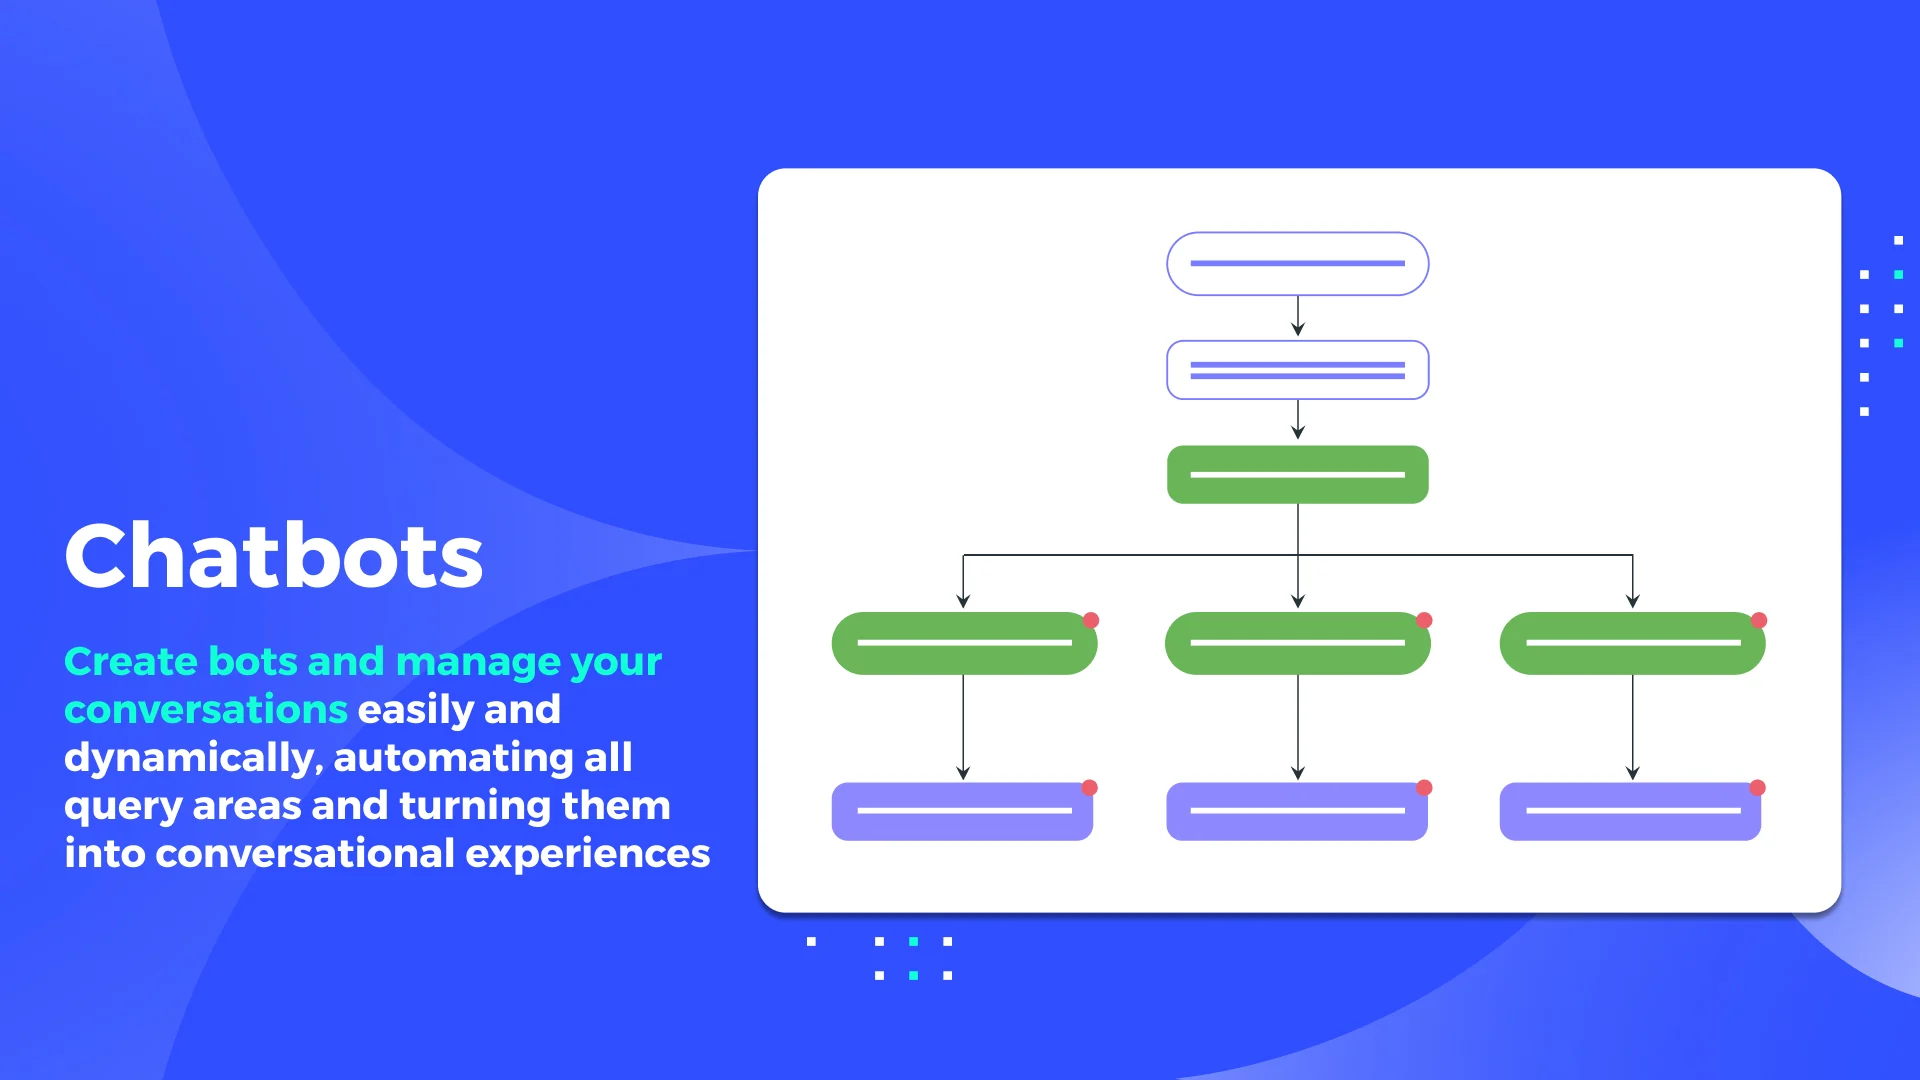 Create chatbots with intuitive flows - Using a decision tree diagram, you can create chatbots with dynamic flows easily.